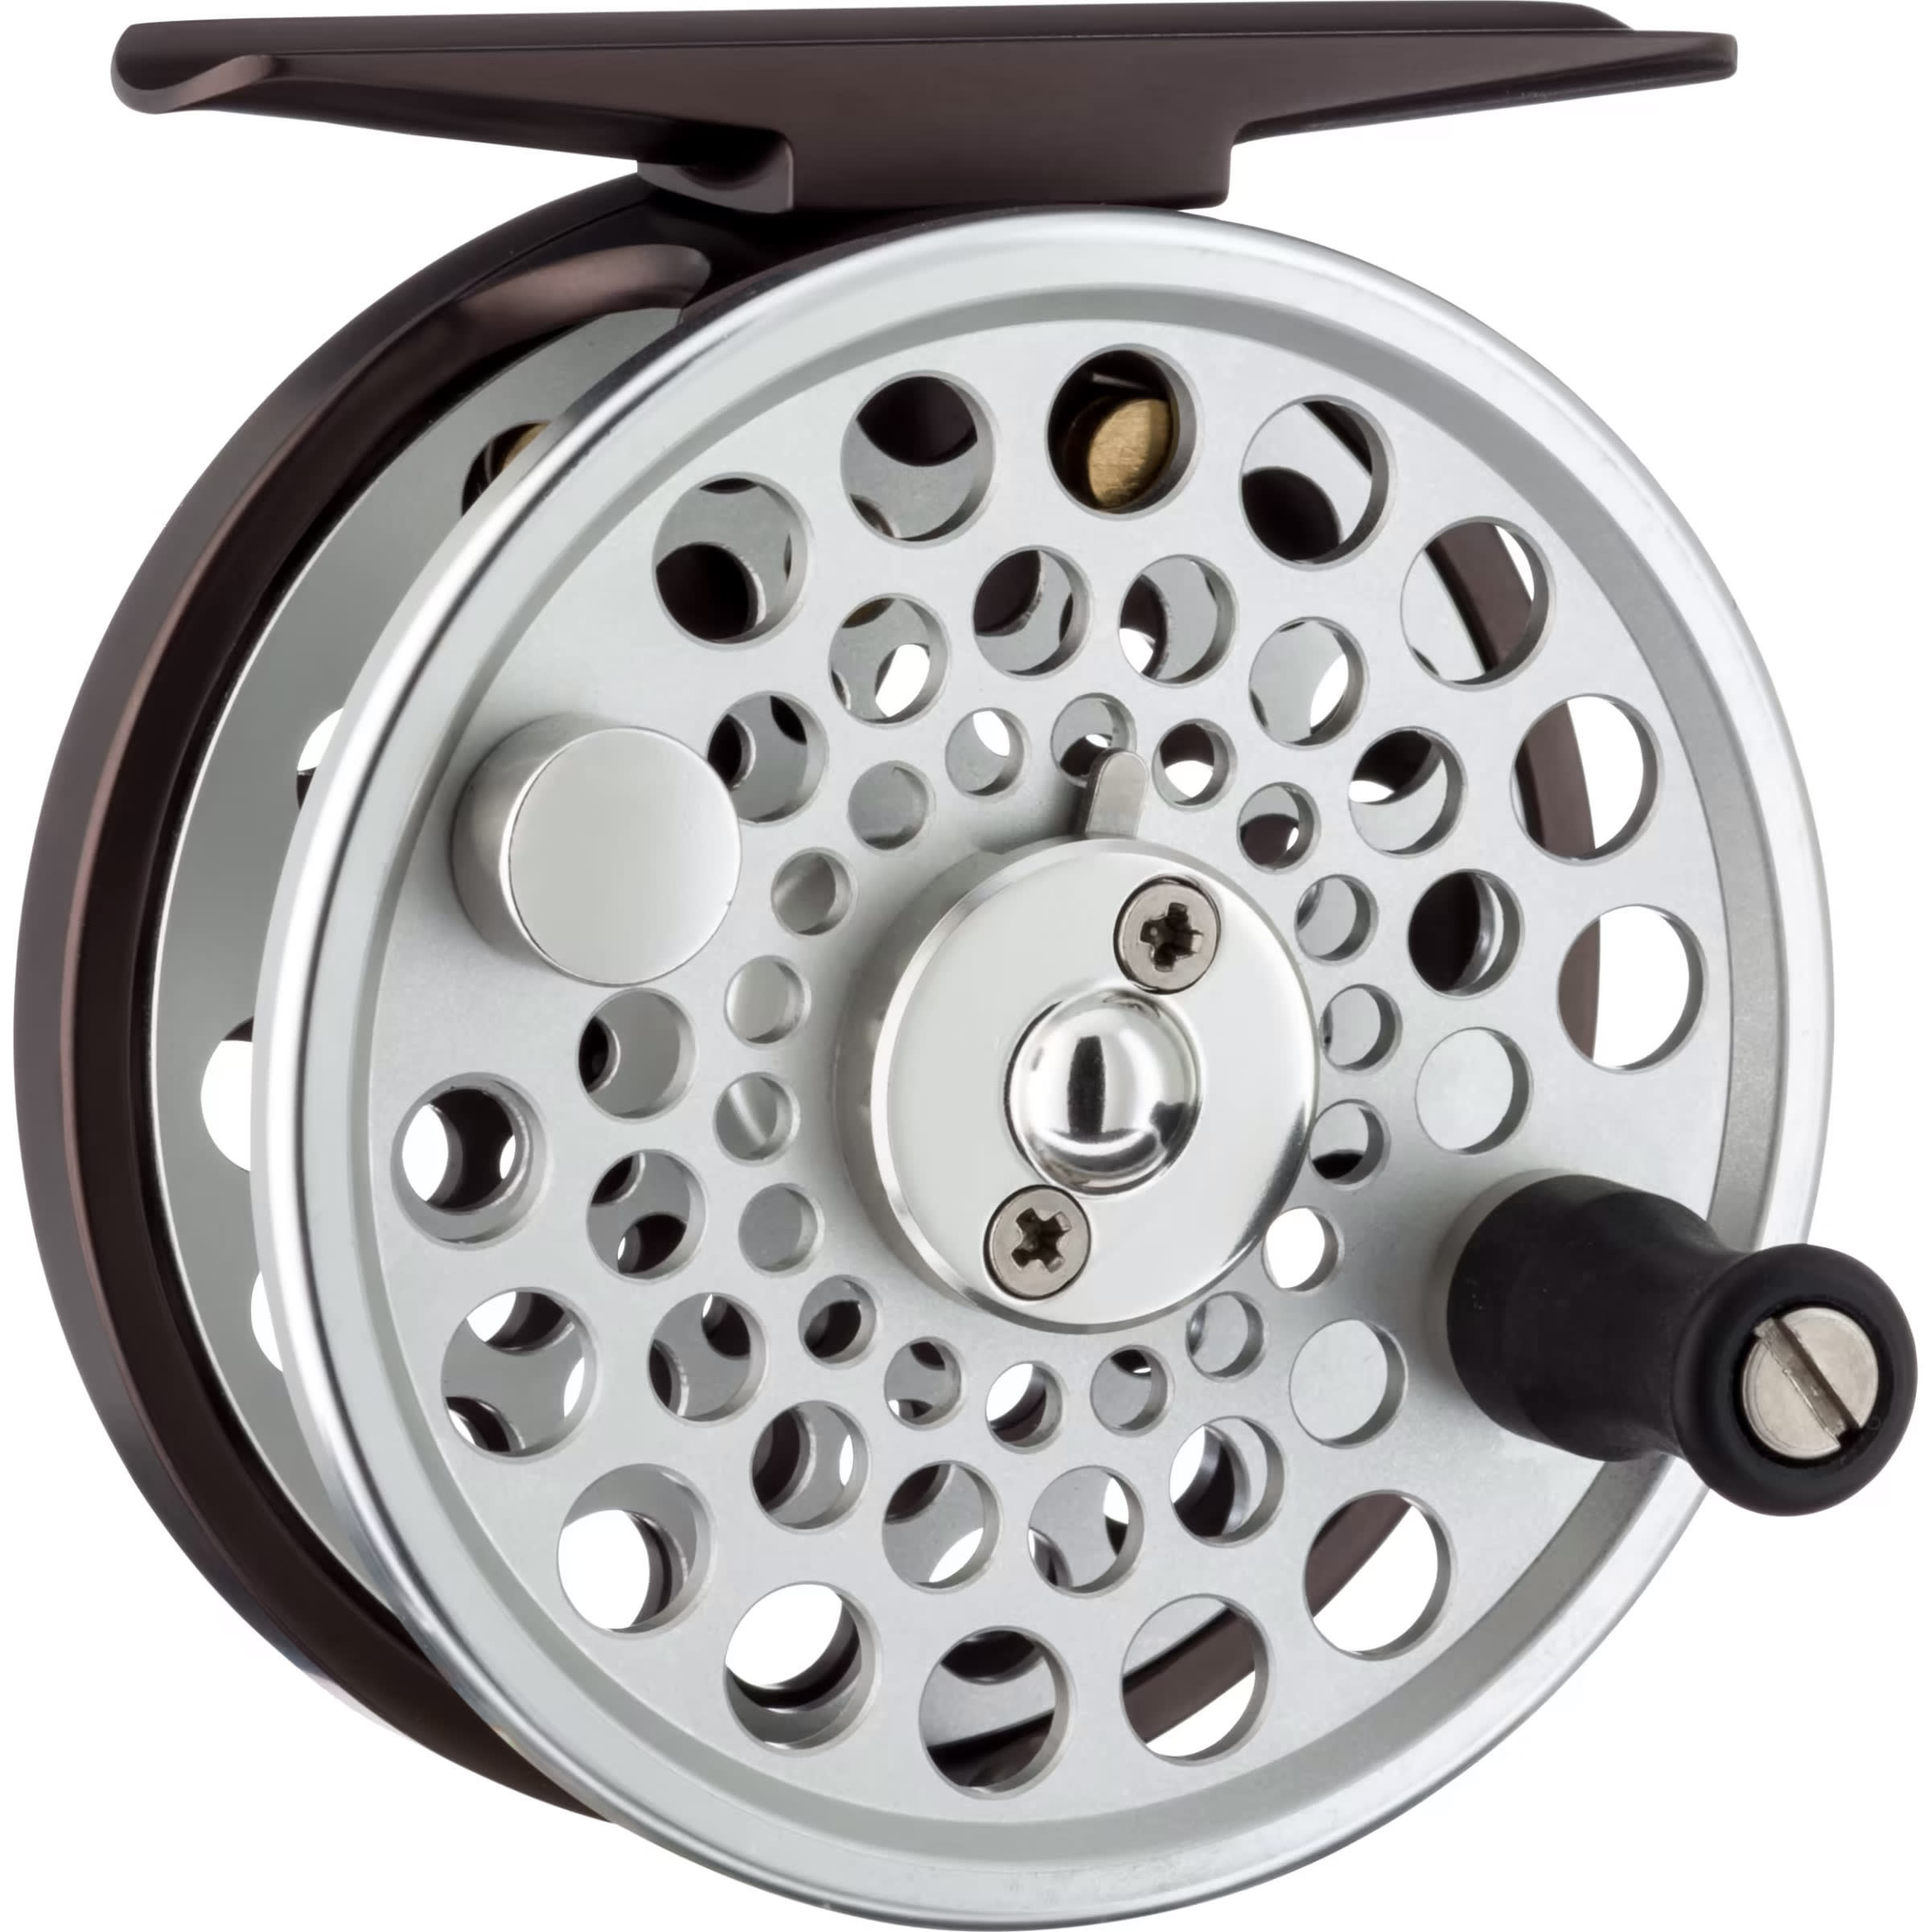 White River Fly Shop® Classic Fly Reel